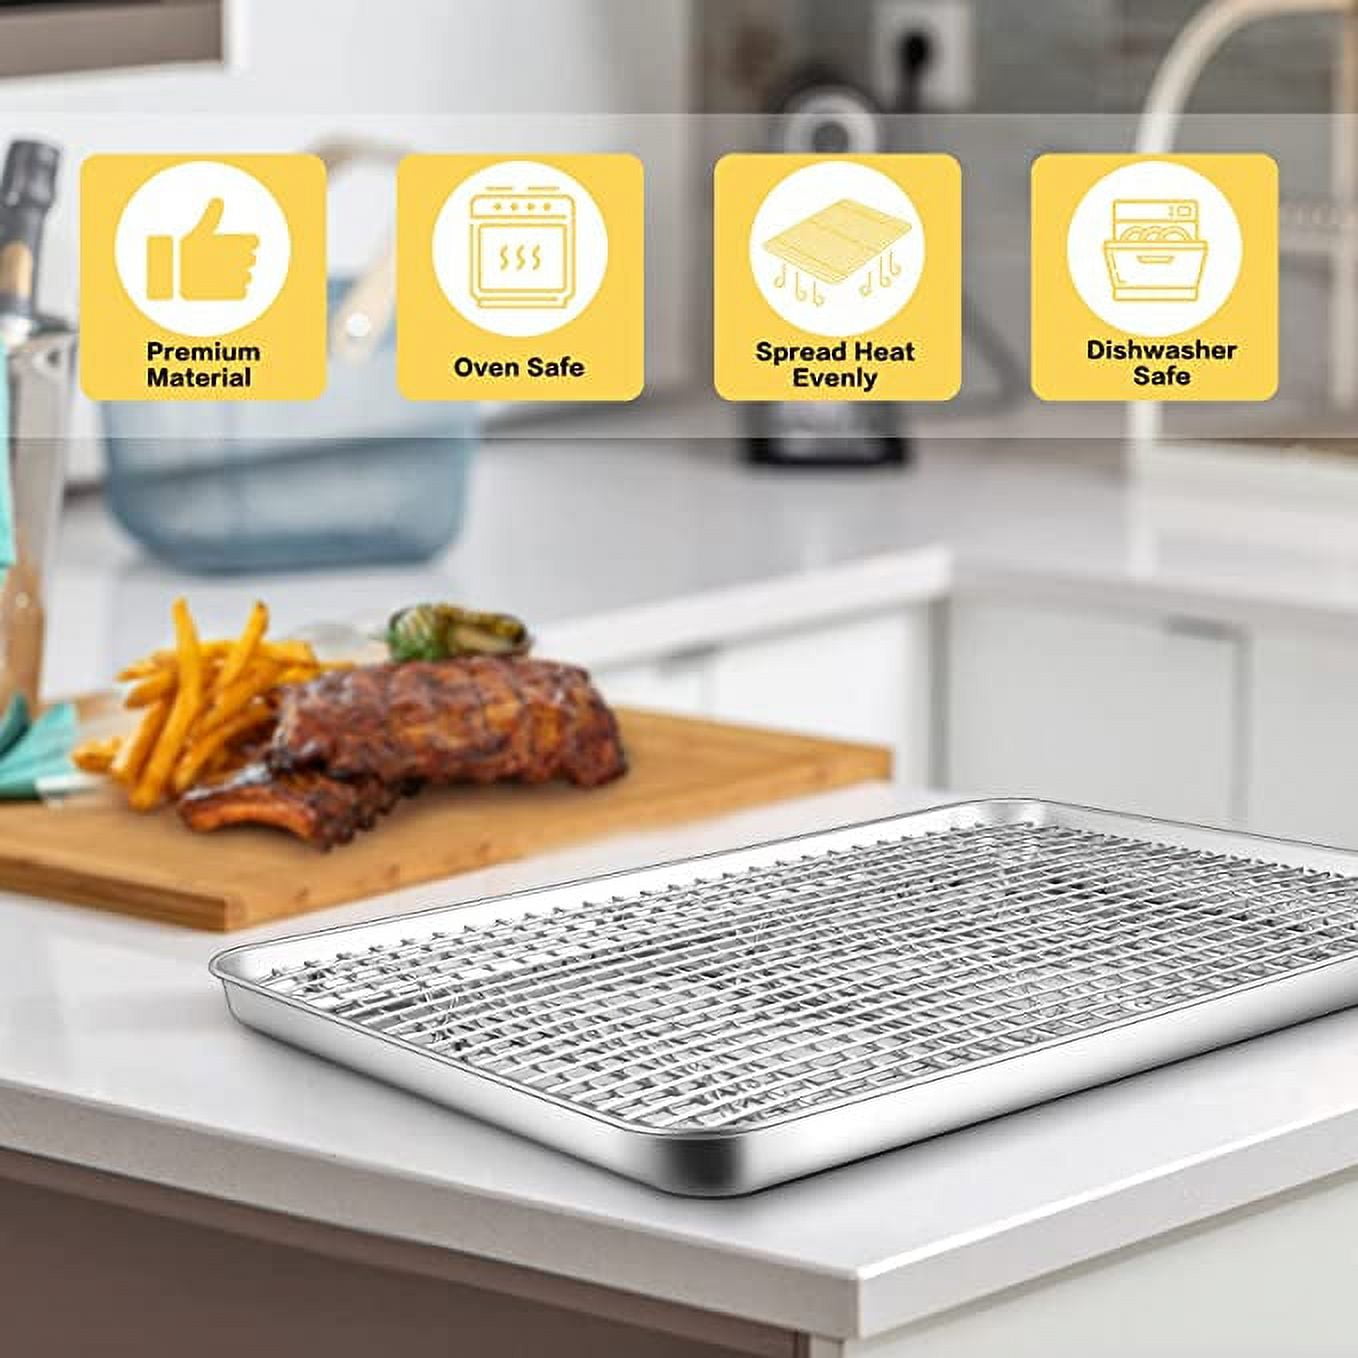 9 Inch Toaster Oven Tray and Rack Set, Small Stainless Steel Baking Pan  with Cooling Rack,Dishwasher Safe Baking Sheet 